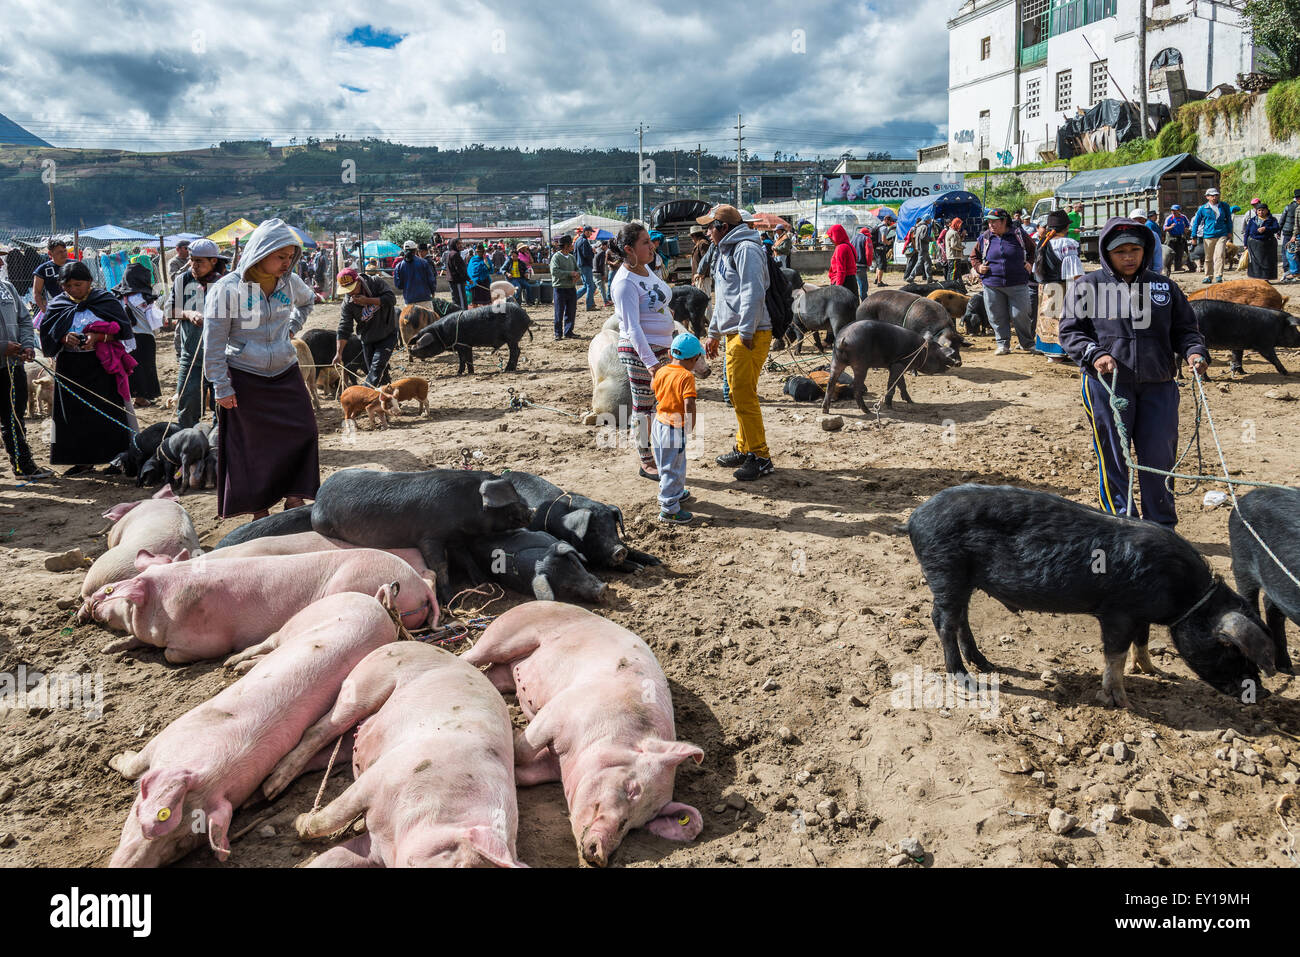 Pigs and other animals are bought and sold at livestock market. Otavalo, Ecuador. Stock Photo